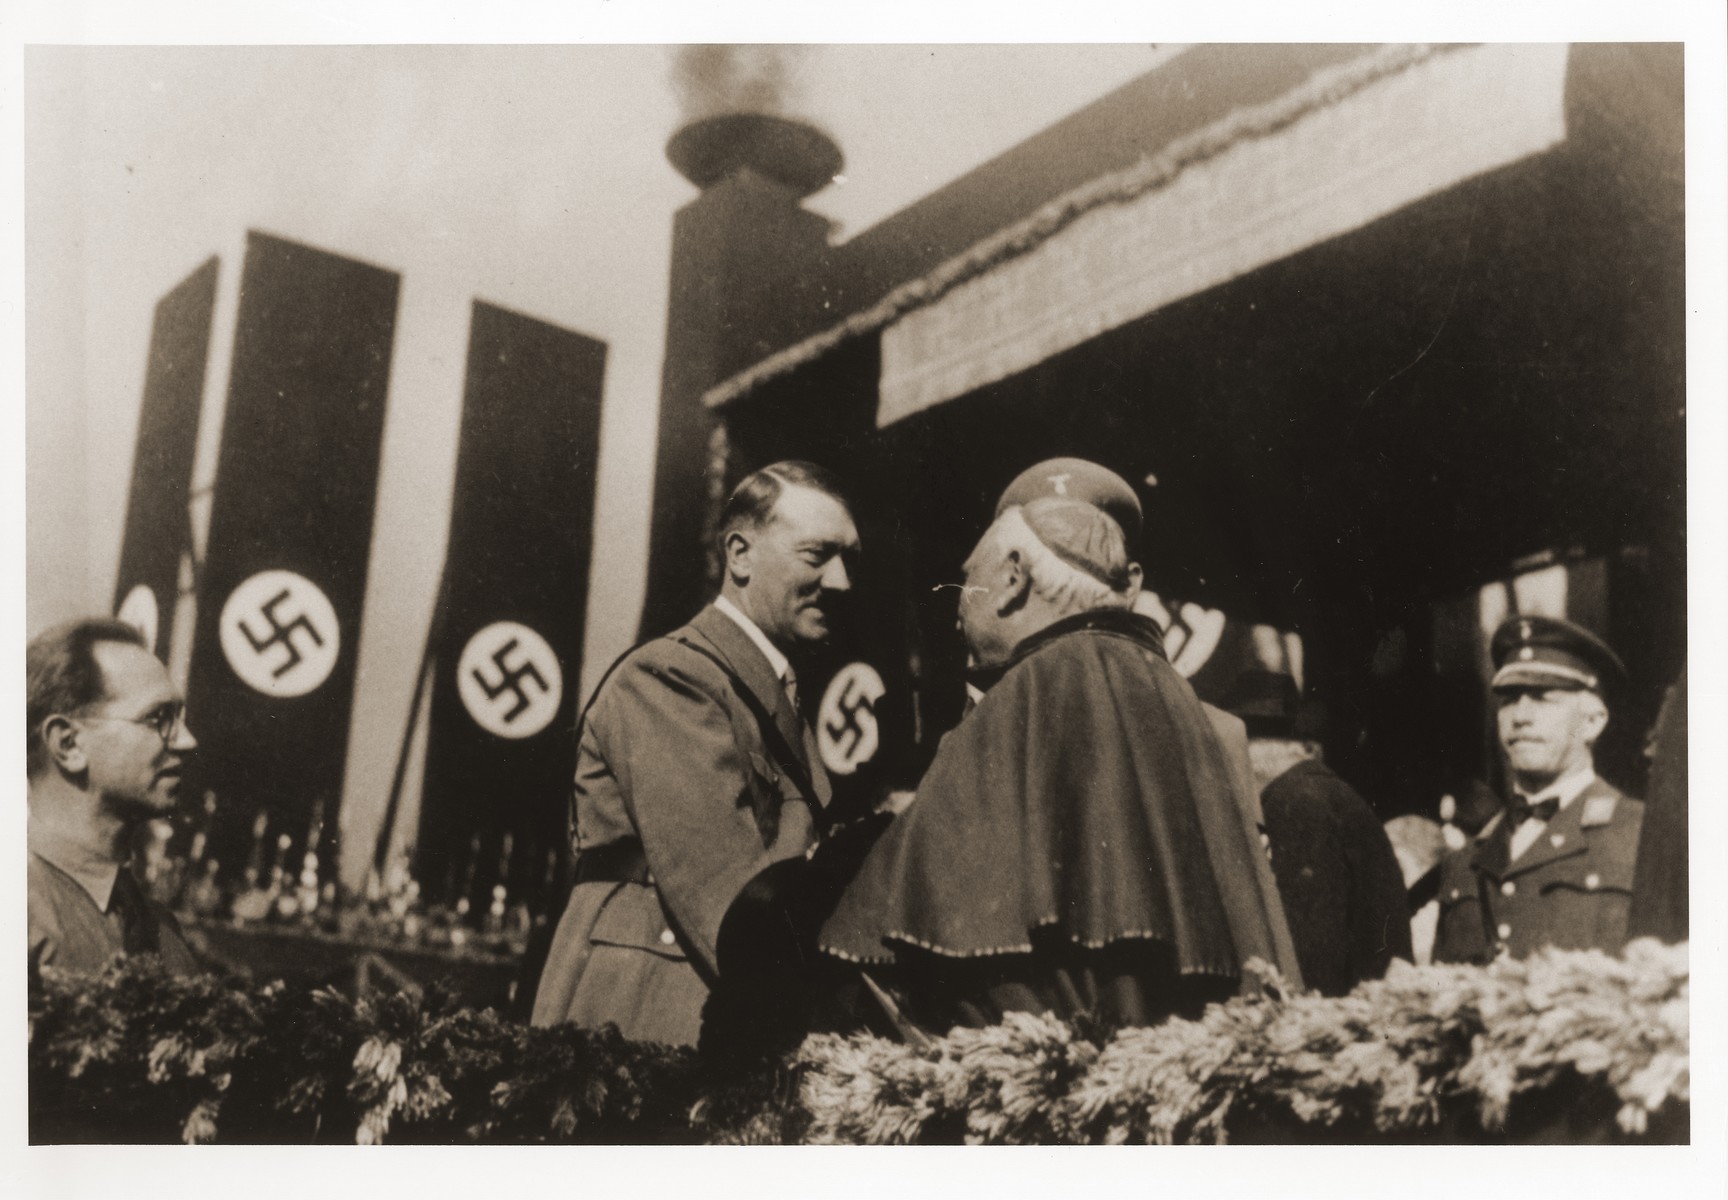 Adolf Hitler greets Munich Nuncio Archbishop Alberto Vassallo di Torregrossa, Munich, 1933. The occasion was probably the ground stone laying ceremony at the Haus der Kunst (Art Exhibition Hall) in Munich, October 15, 1933. The Vatican subsequently protested the Nazi Party's use of the photograph for election propaganda.